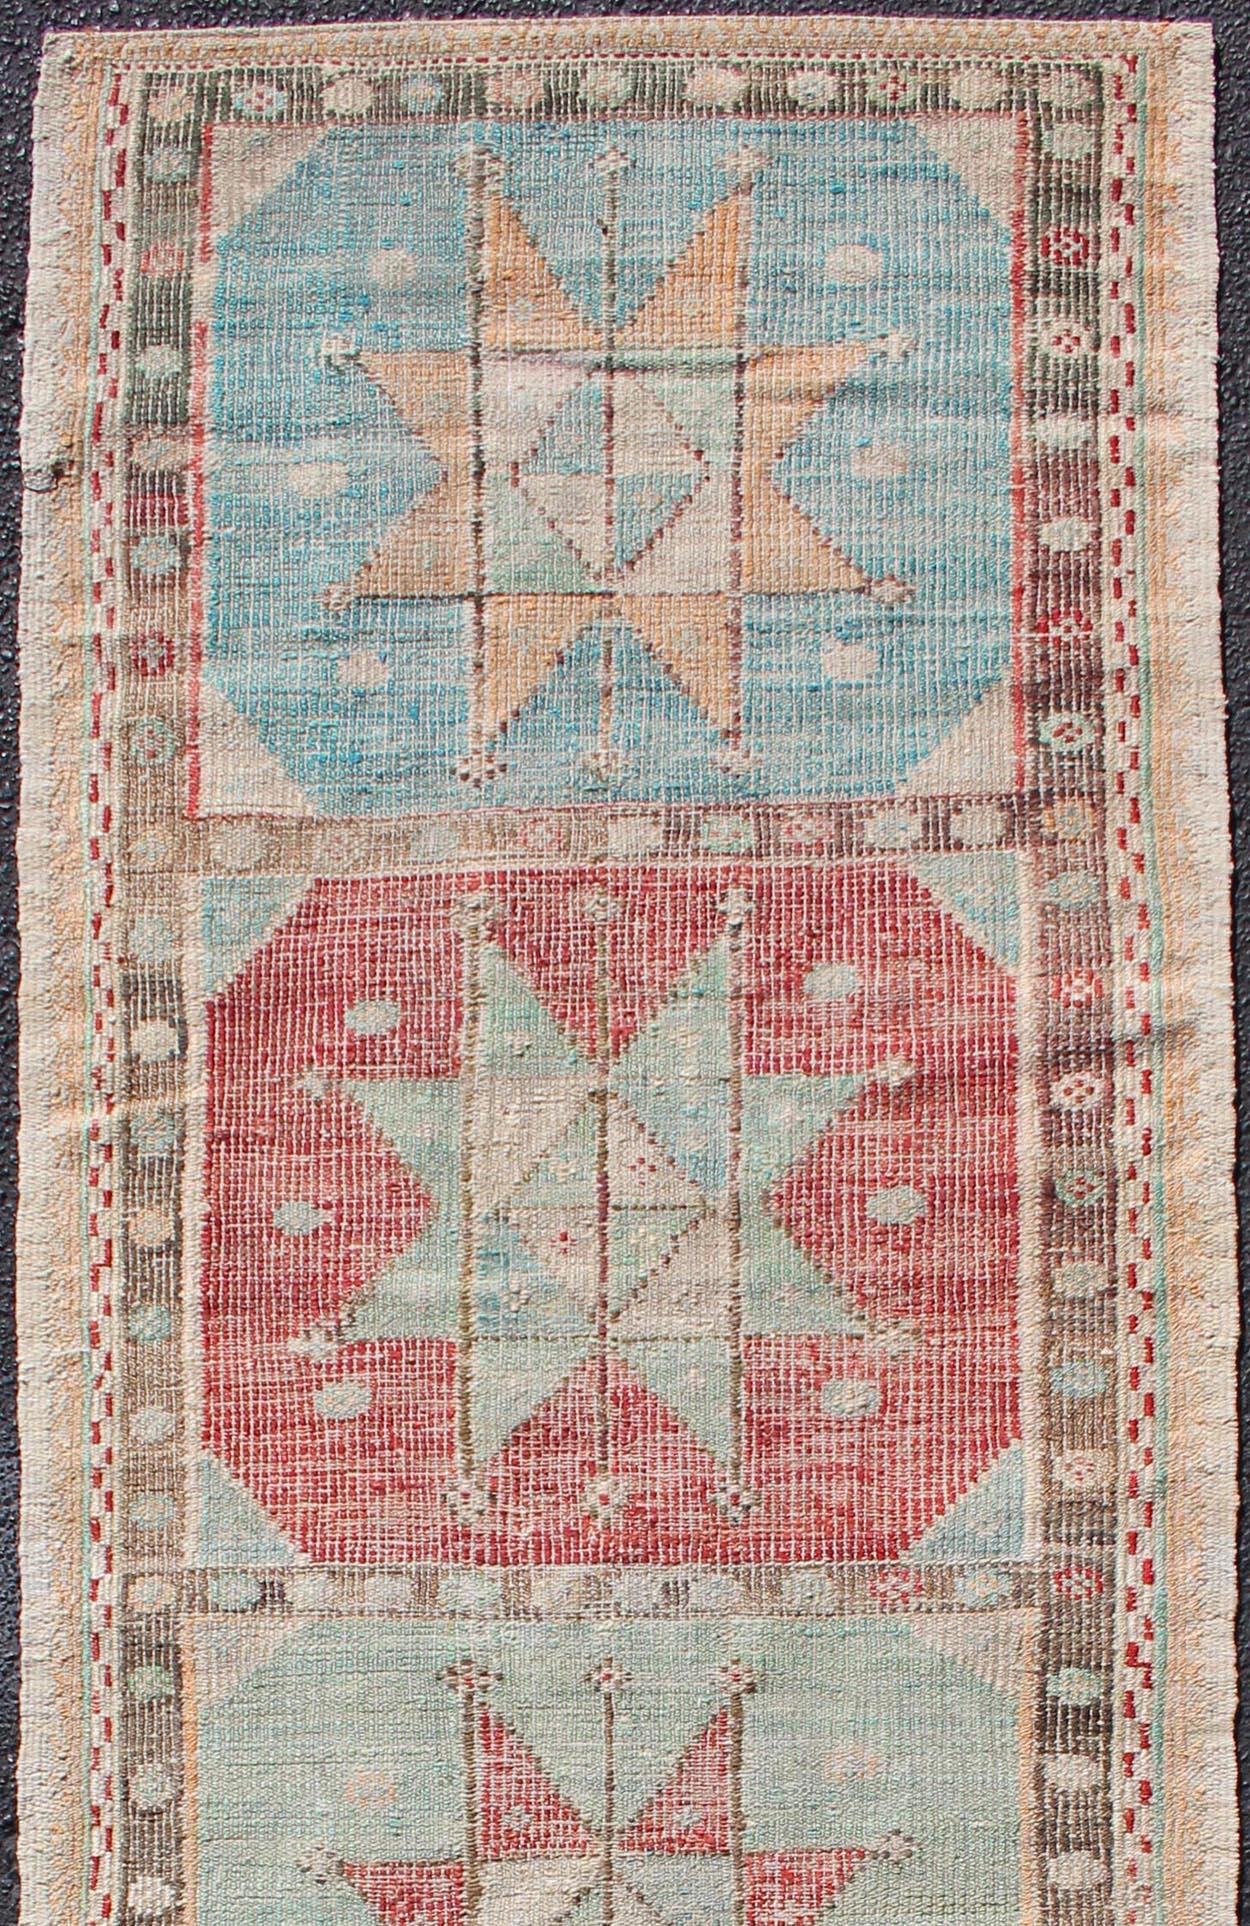 Turkish Kilim vintage carpet in light blue, green, ivory, red and cream, rug en-176957, country of origin / type: Turkey / Kilim, circa 1950

This Embroidered Kilim rug, Jajim, from Turkey features geometric medallion design of various geometric